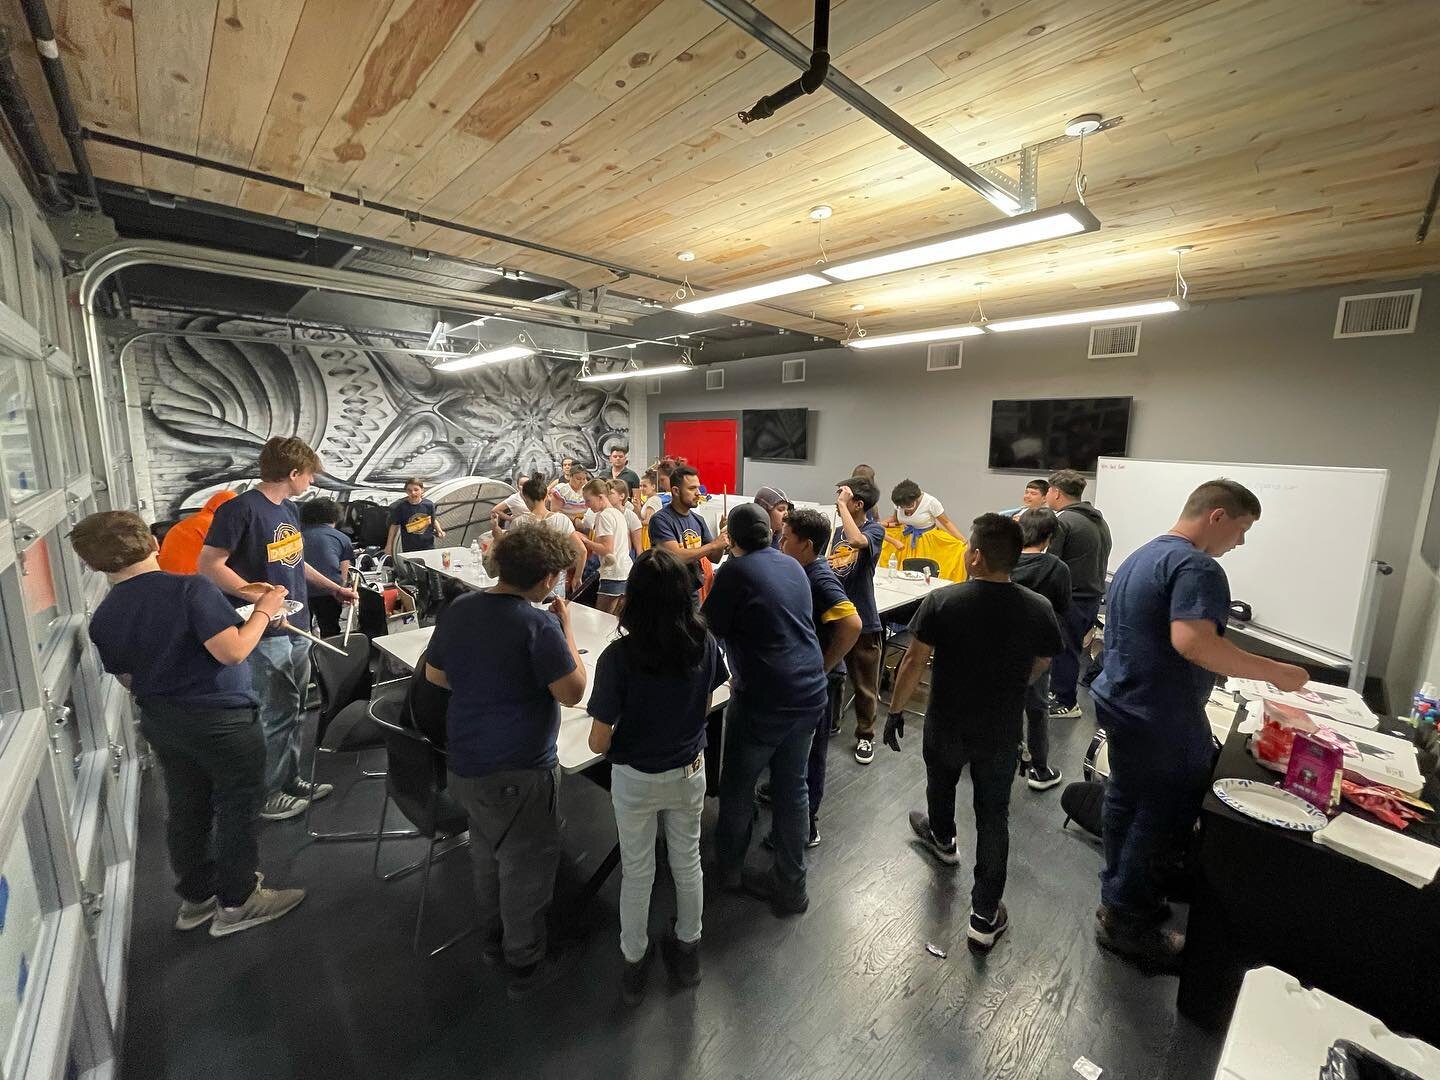 DRUMLINE rocking the house! ➡️➡️swipe to watch the entire intro performance by percussion instructor Mario, and the middle school intro drum line group.
.
#drumline #middleschool #artseducation #music #denver #denverpublicschools